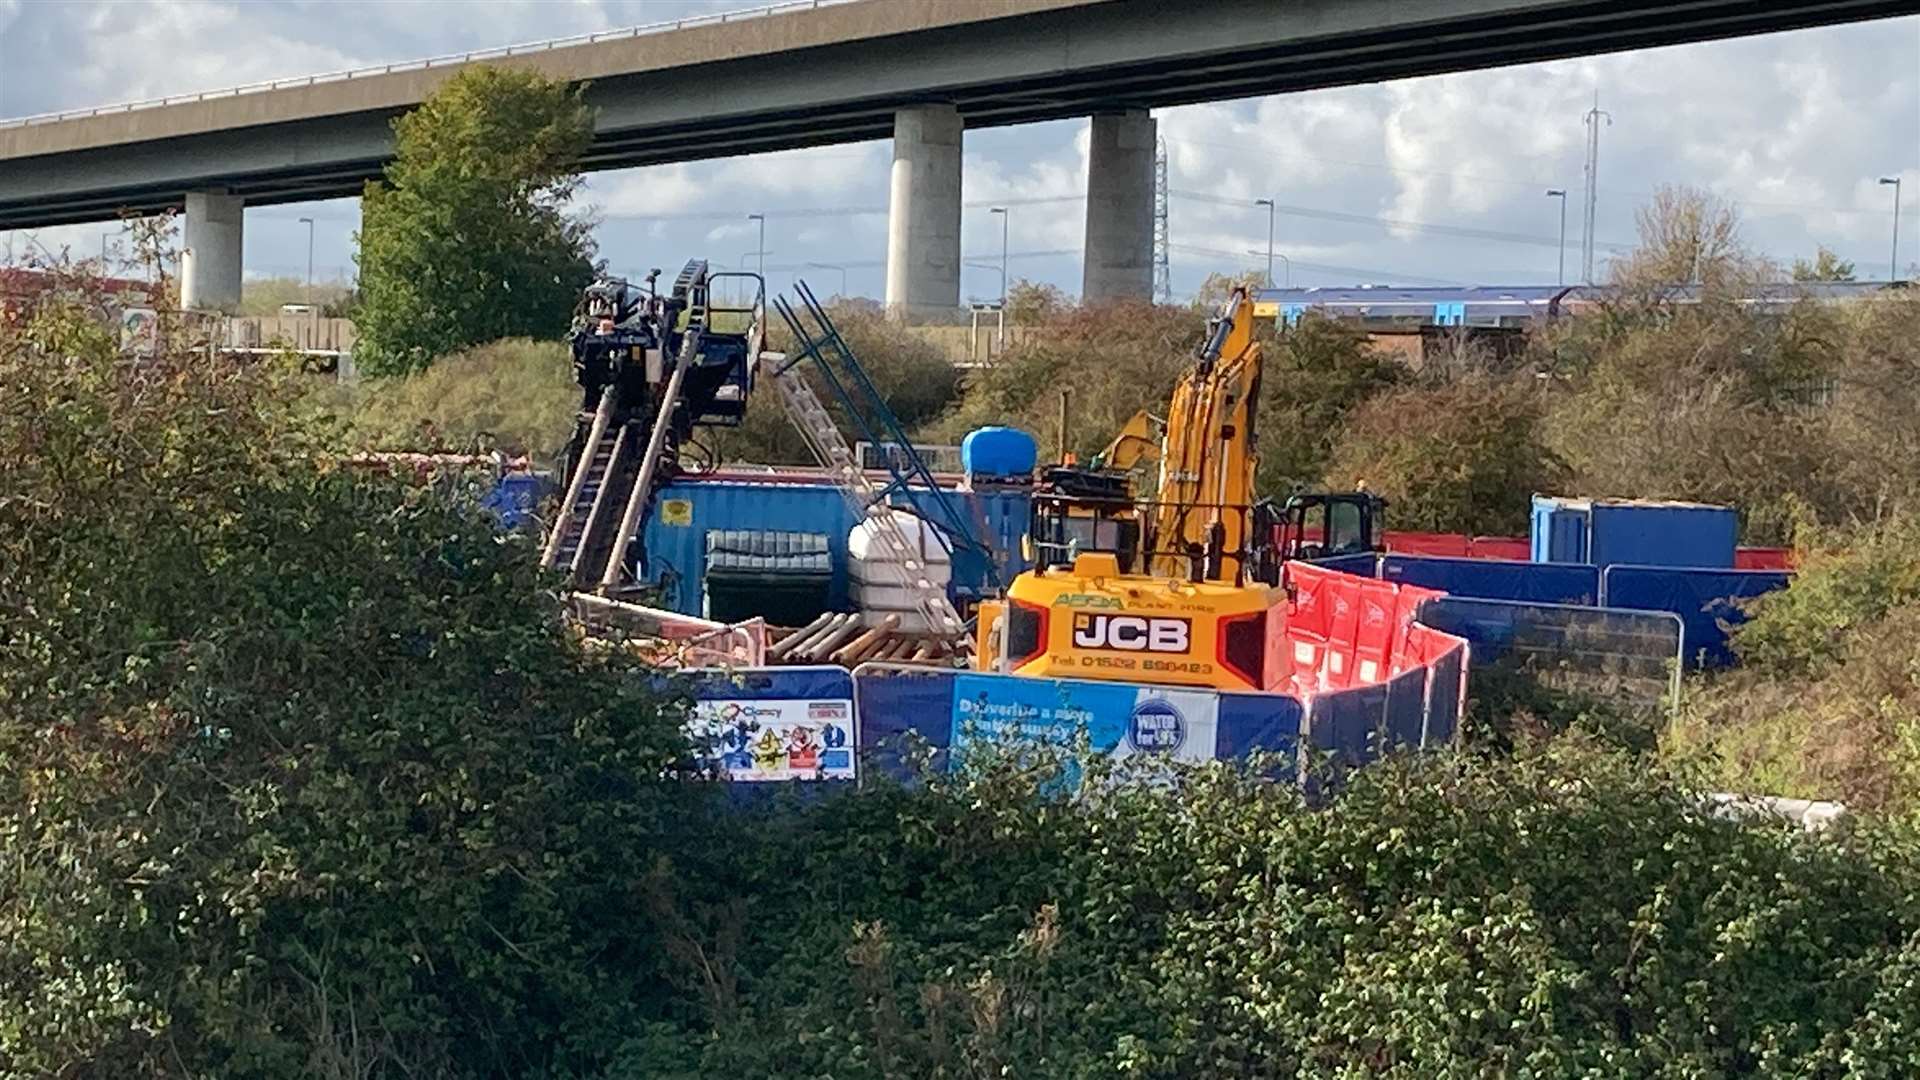 Drilling has stopped on two new pipes under the Swale to serve the Isle of Sheppey as part of a £3m scheme by Southern Water